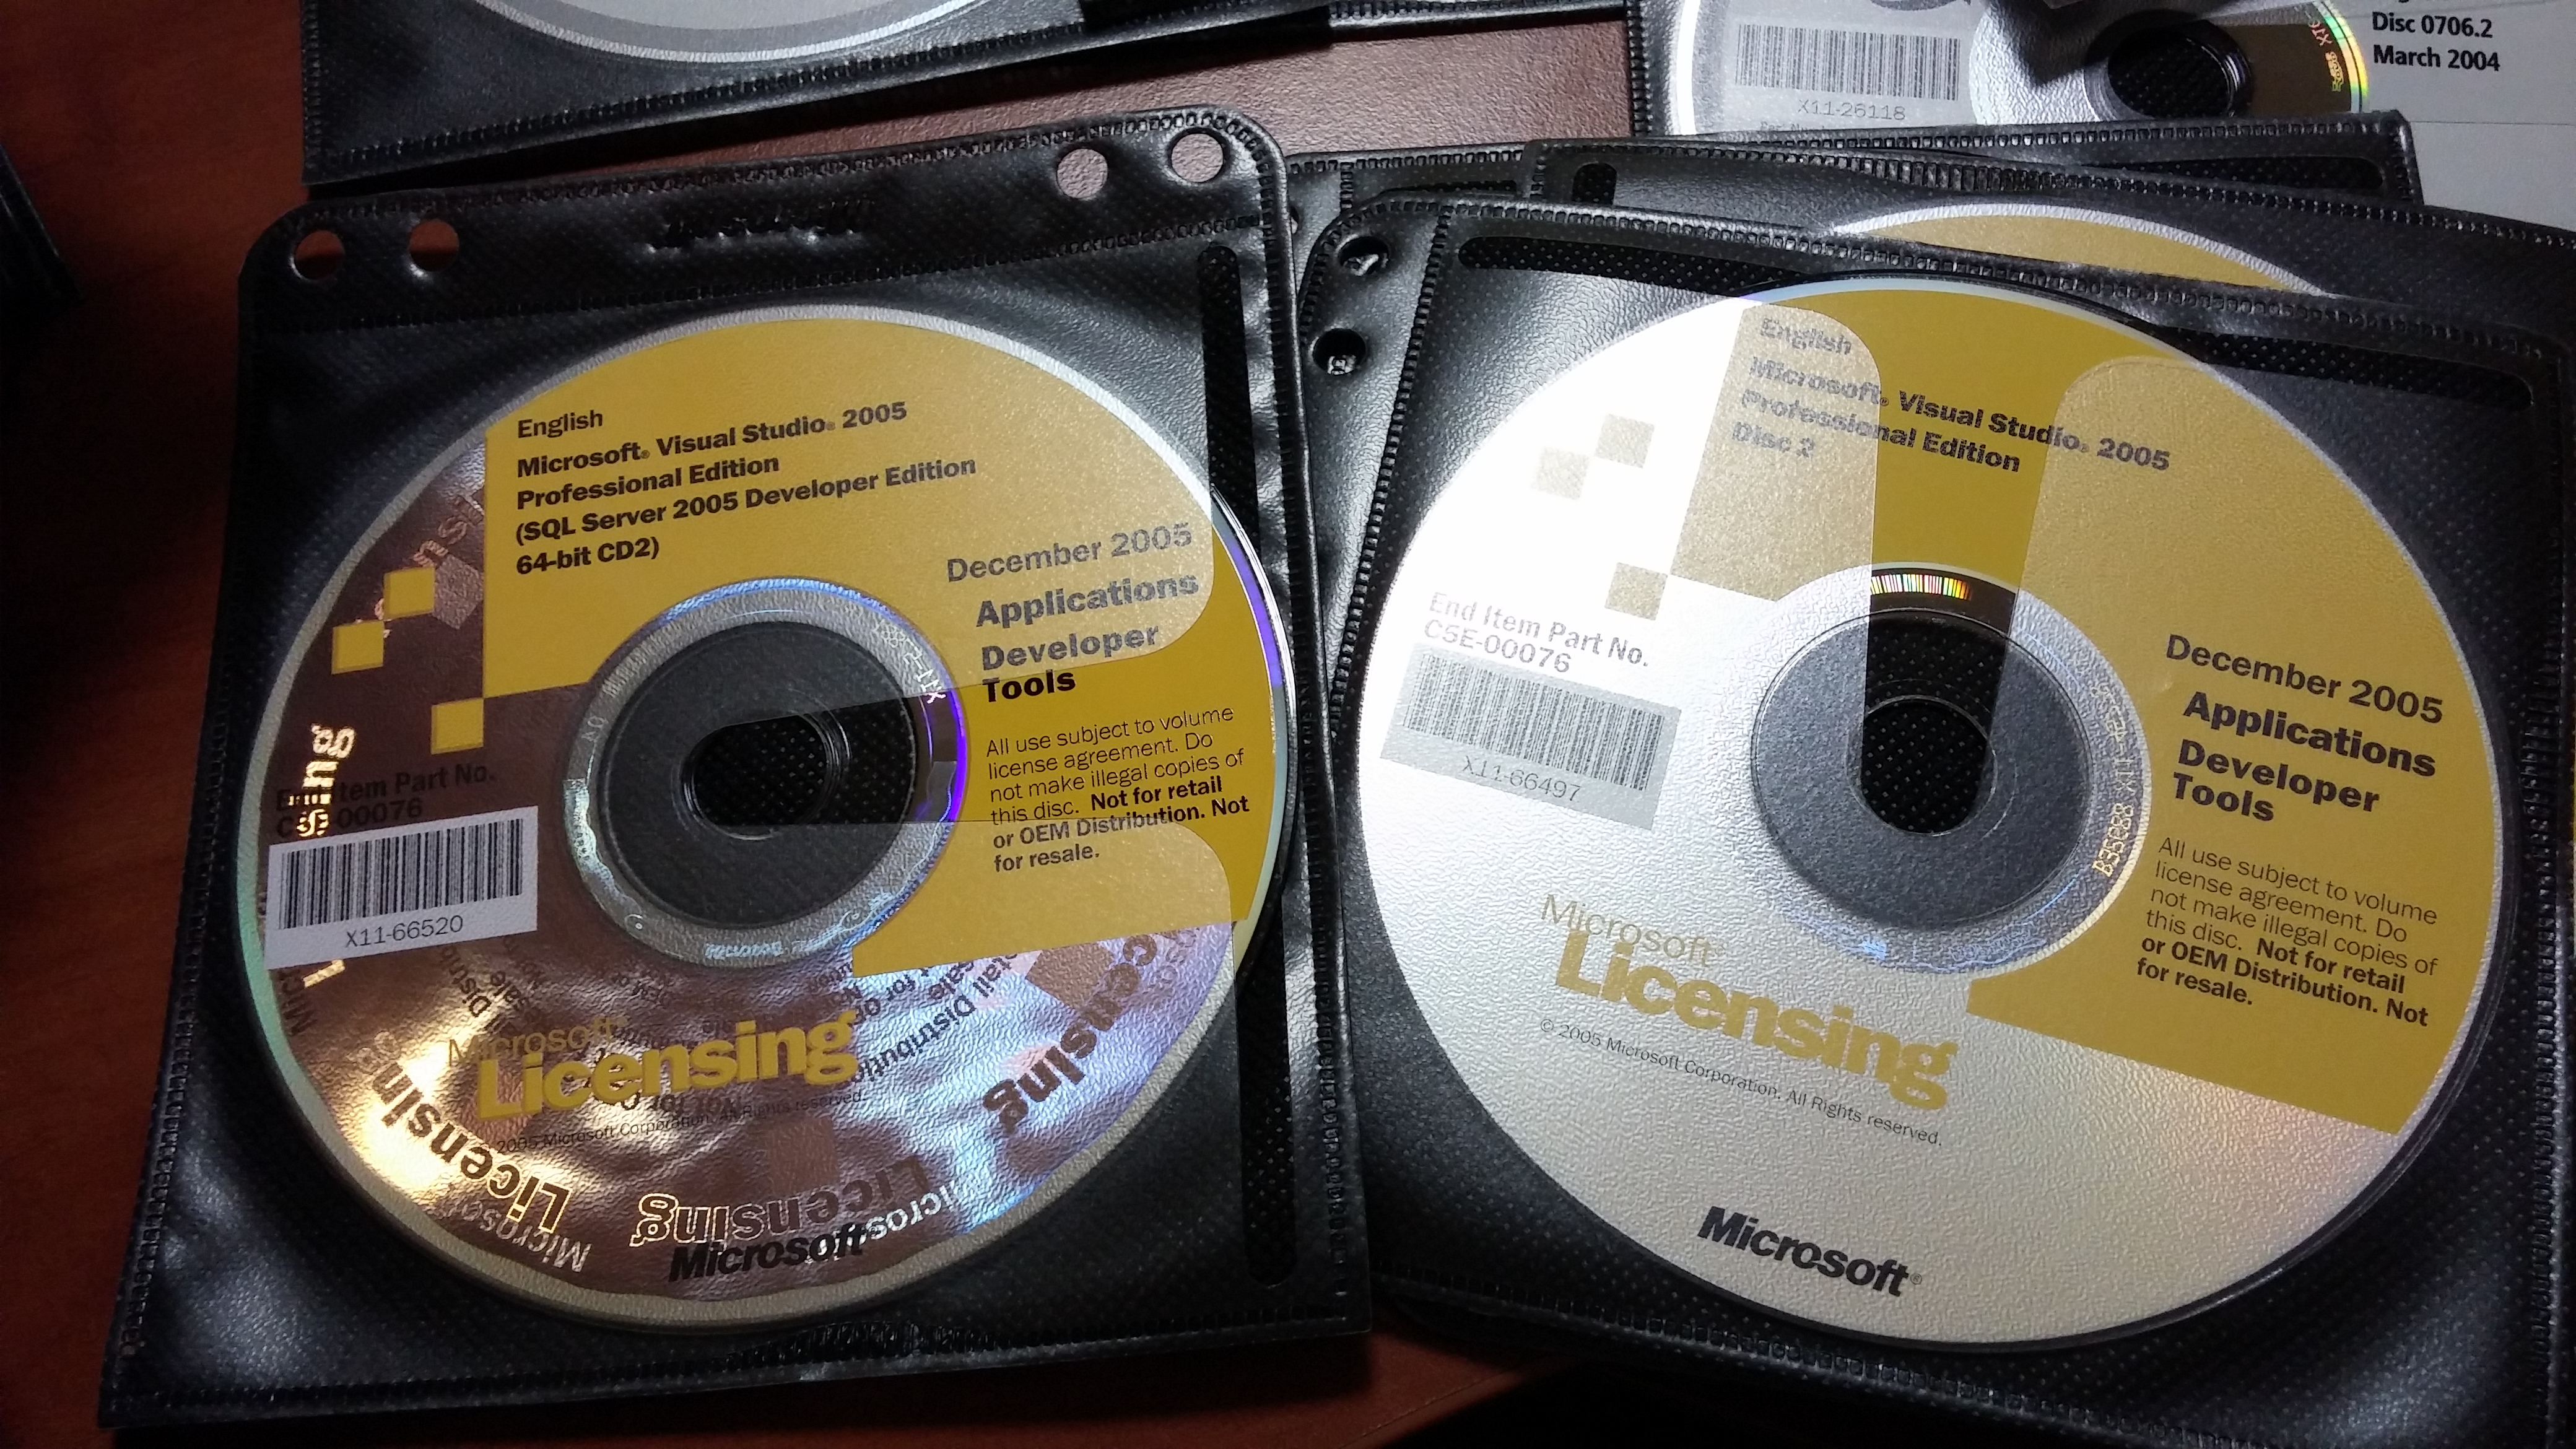 "Old style" MSDN disks